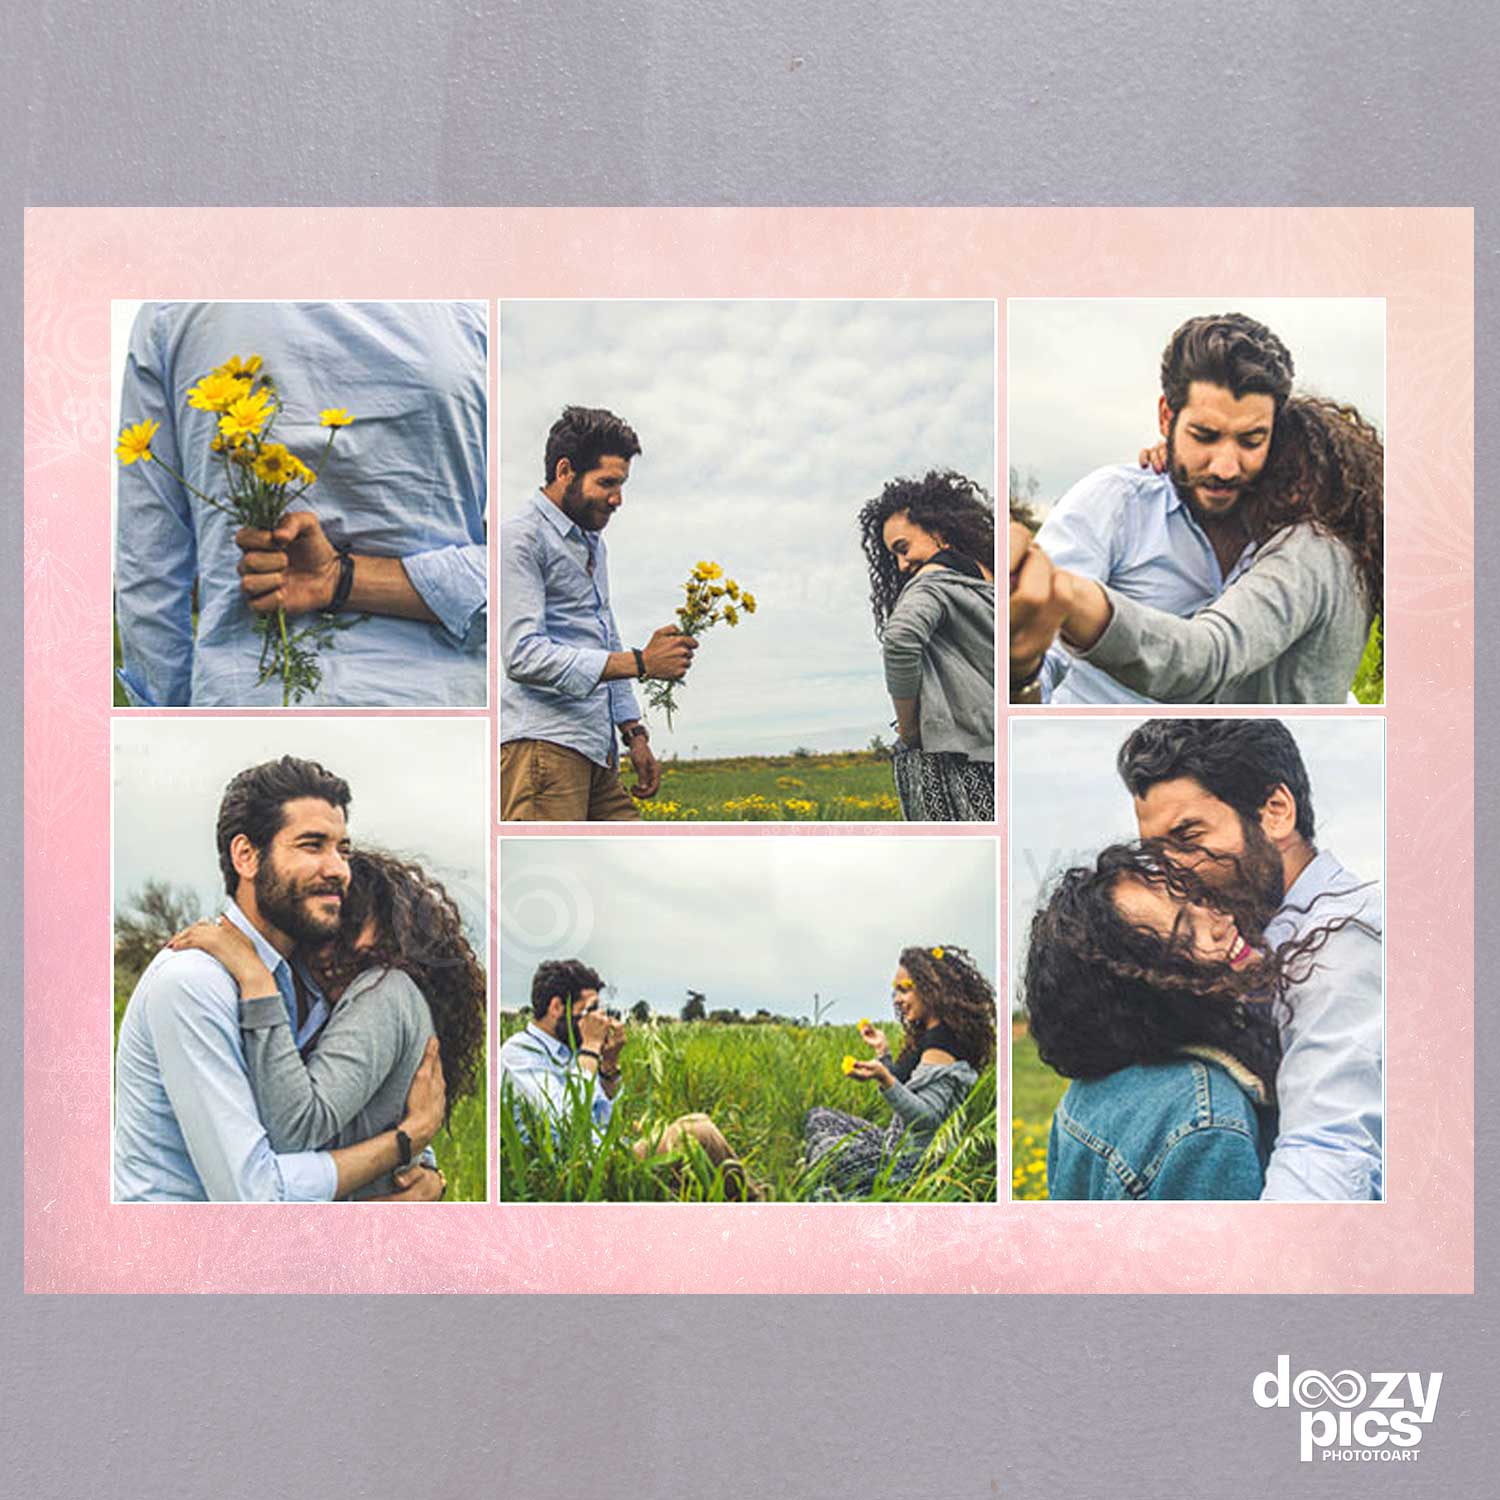 Lovable Couple Collage Frame